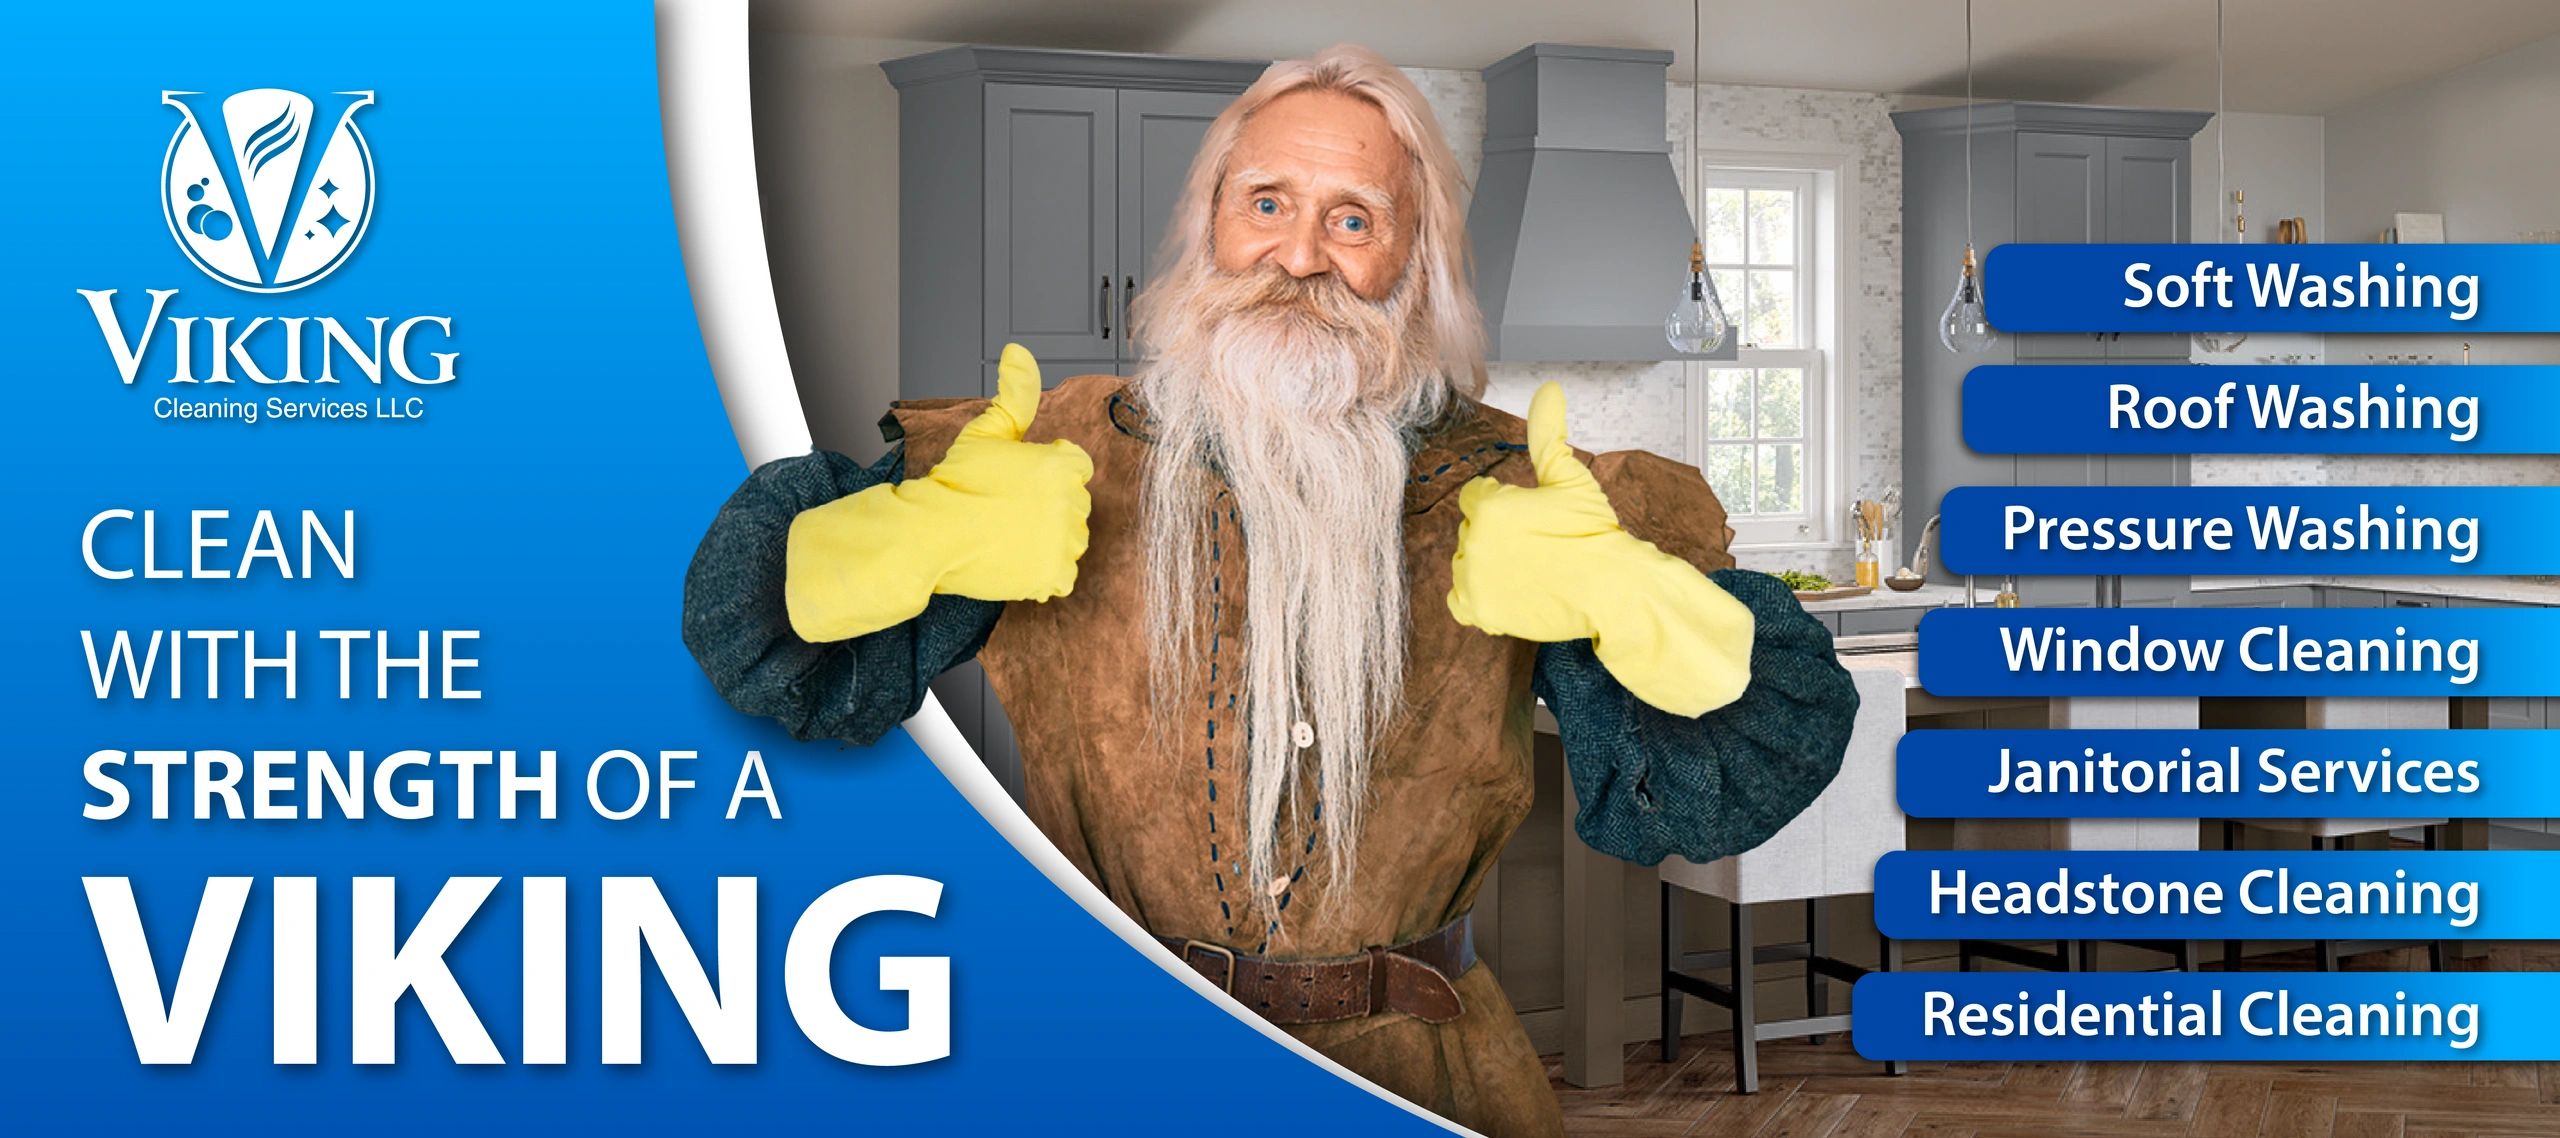 Viking with cleaning gloves and list of services saying 'Clean with the strength of a viking"